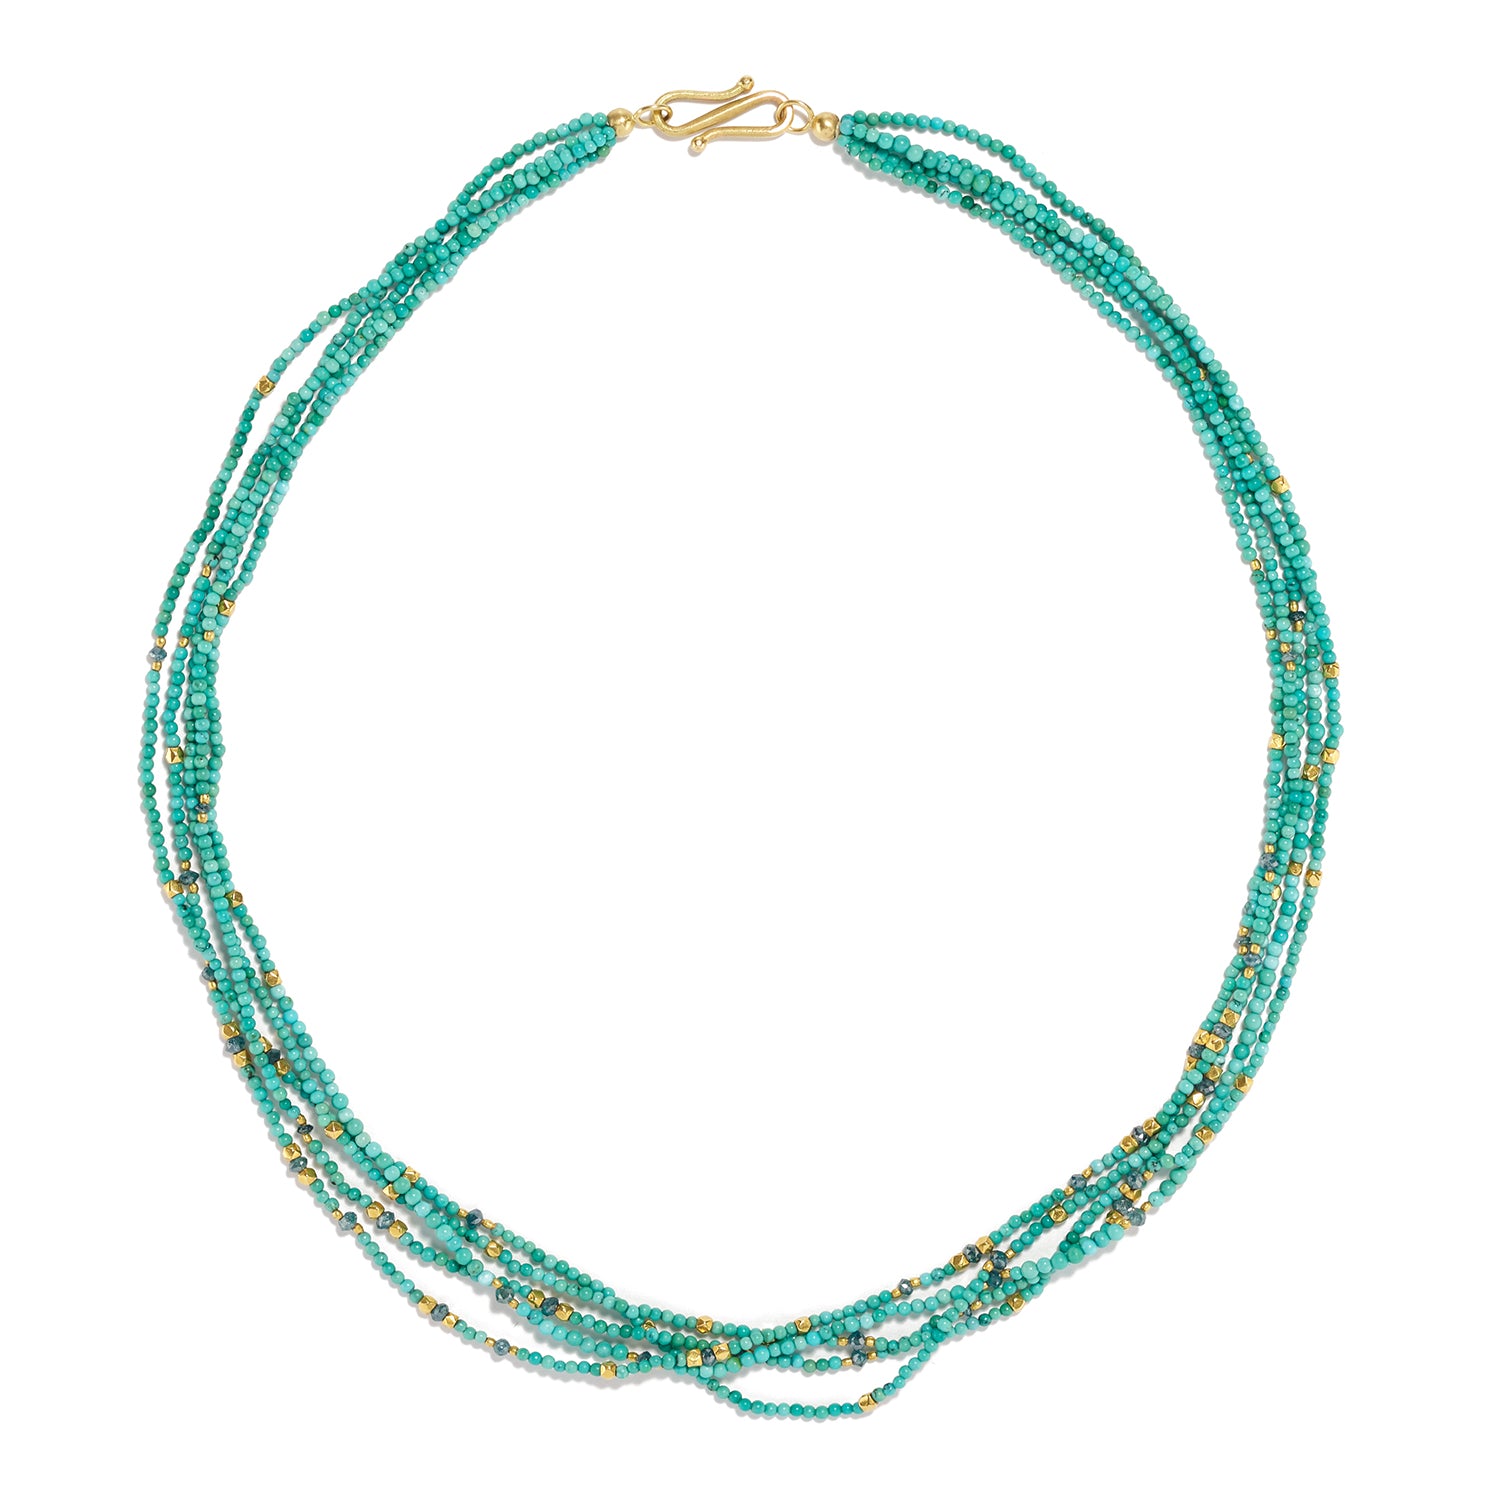 Turquoise and Nepalese Gold Necklace